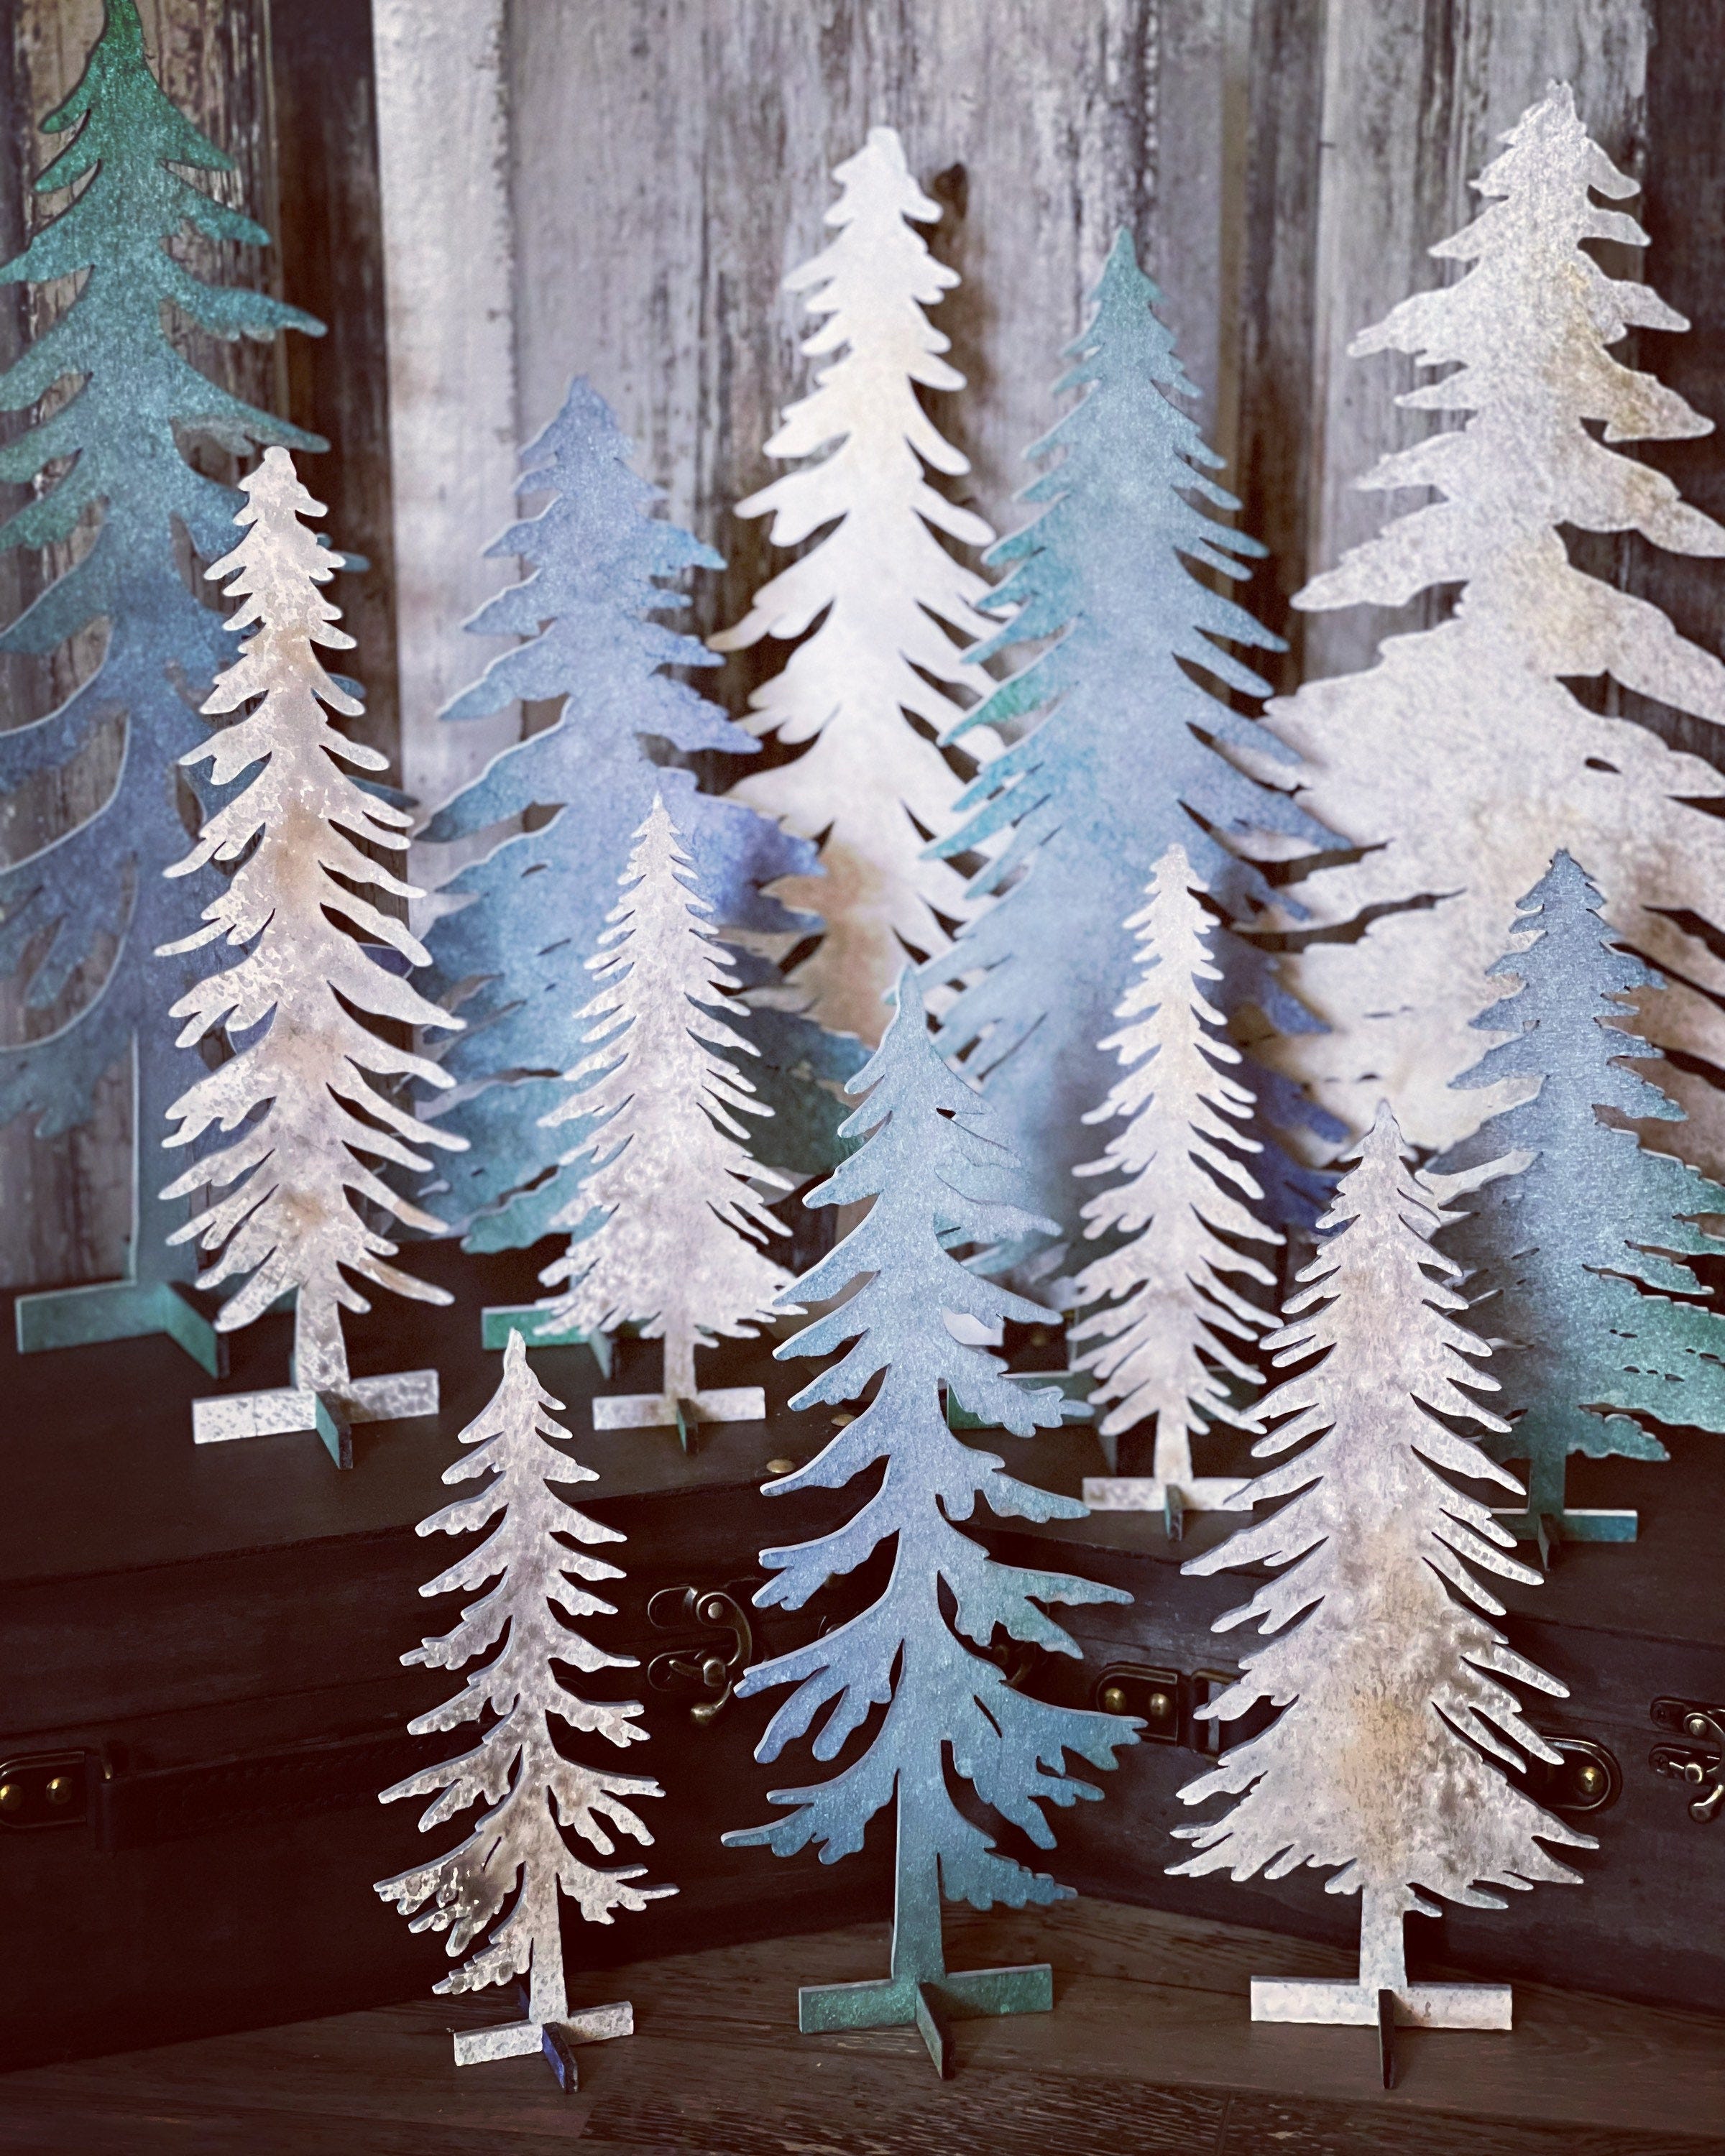 1/8" Standing Pine Trees Set of 12 SVG Digital Download for Glowforge or Laser Not a Physical Item